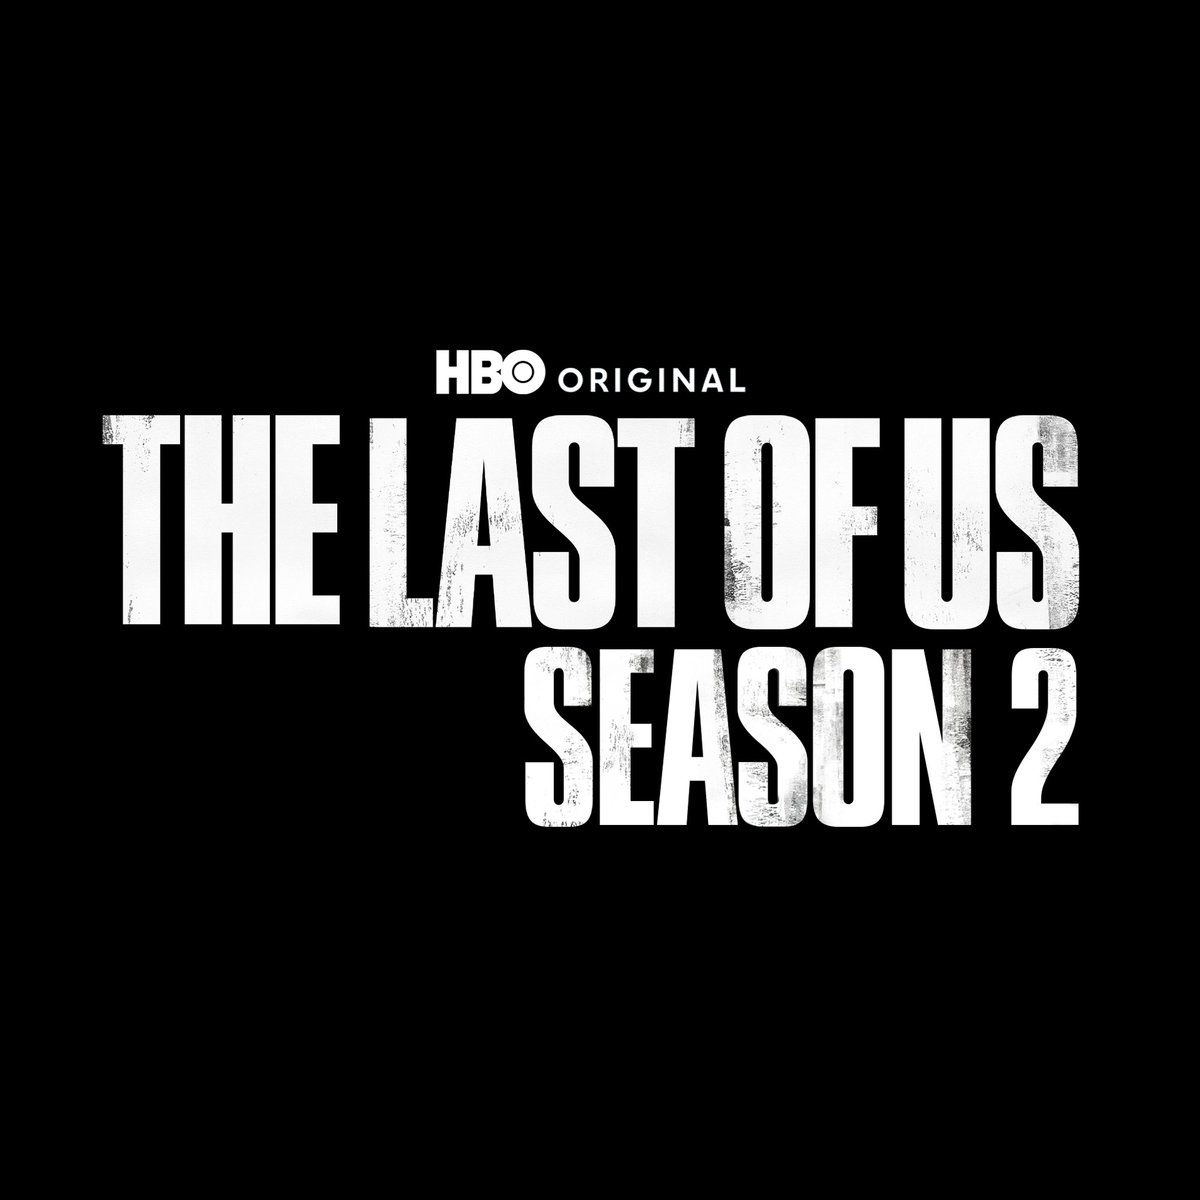 #TheLastofUs S2 info:

• Won't cover the entirety of Part II's story
• Reportedly aiming for a March/April 2025 air date
• Will reportedly consist of 7 episodes
• Expected to wrap filming this August in Canada